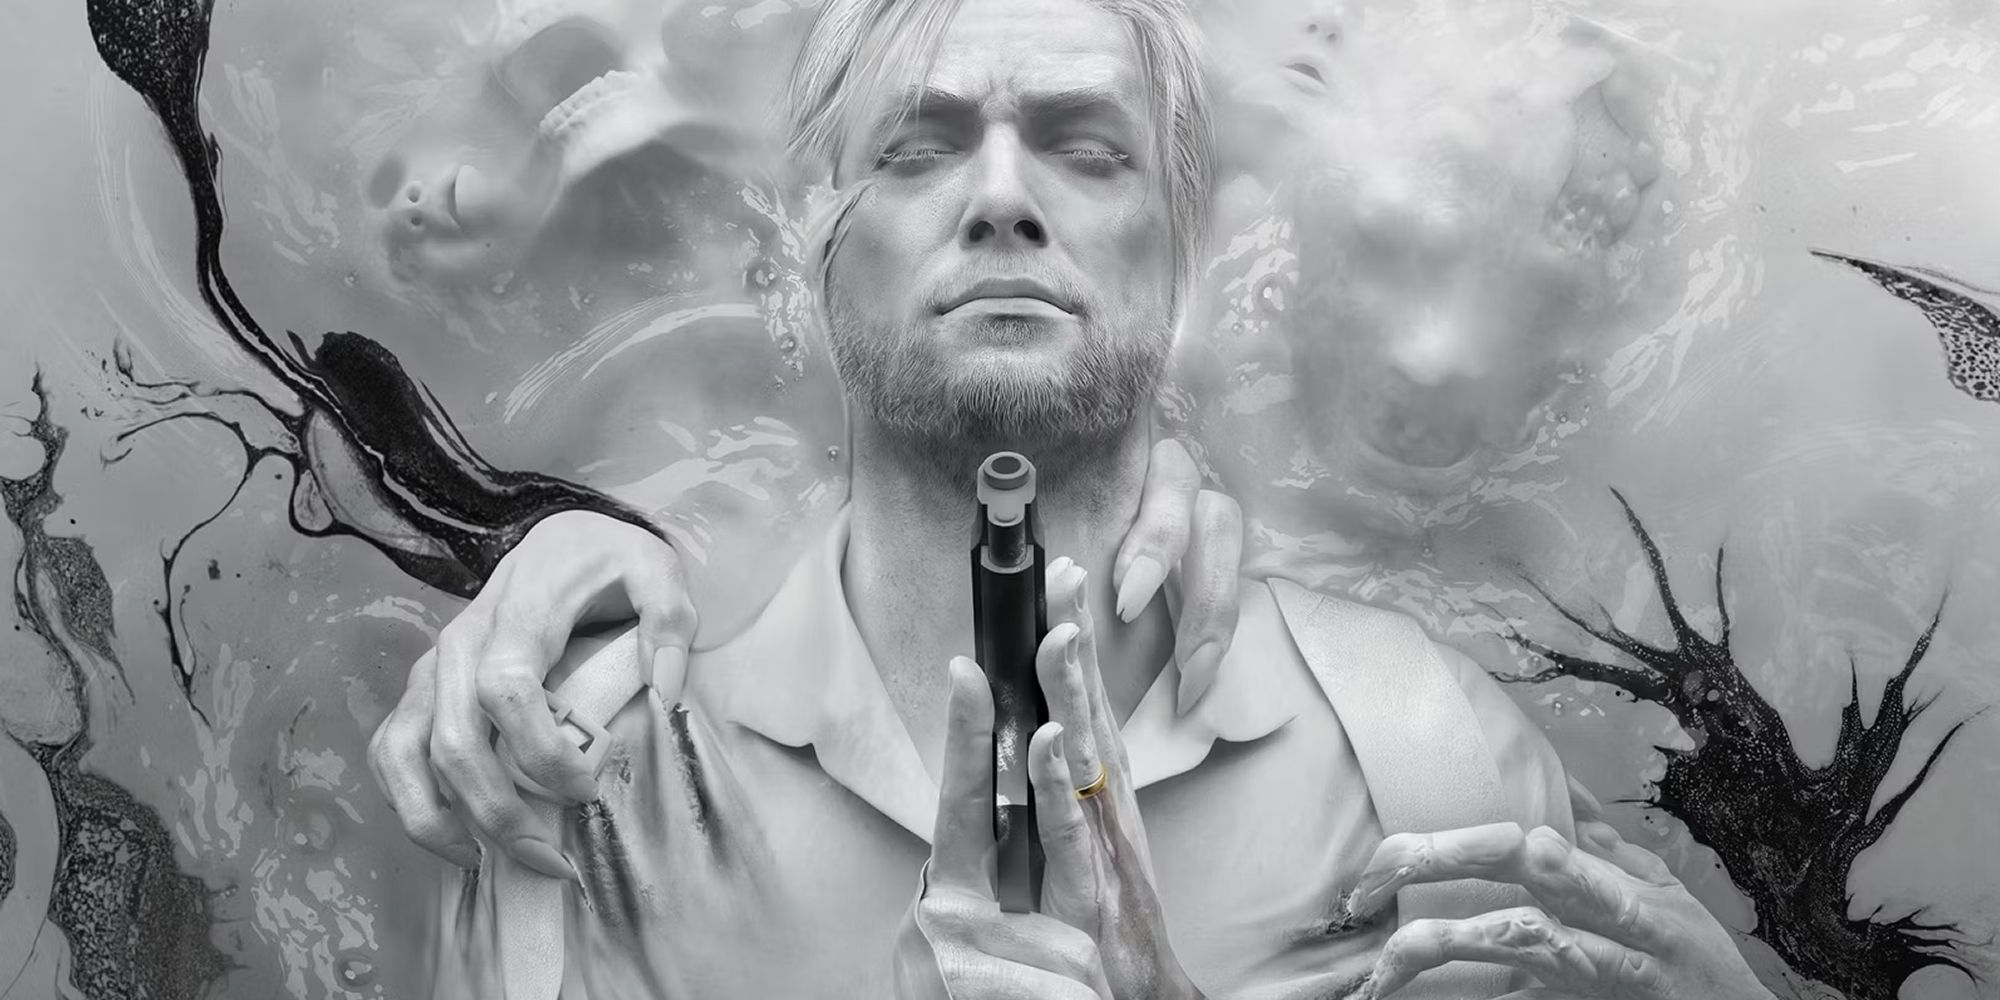 The Evil Within The Hero With A Gun Frozen In Plaster-Like Material